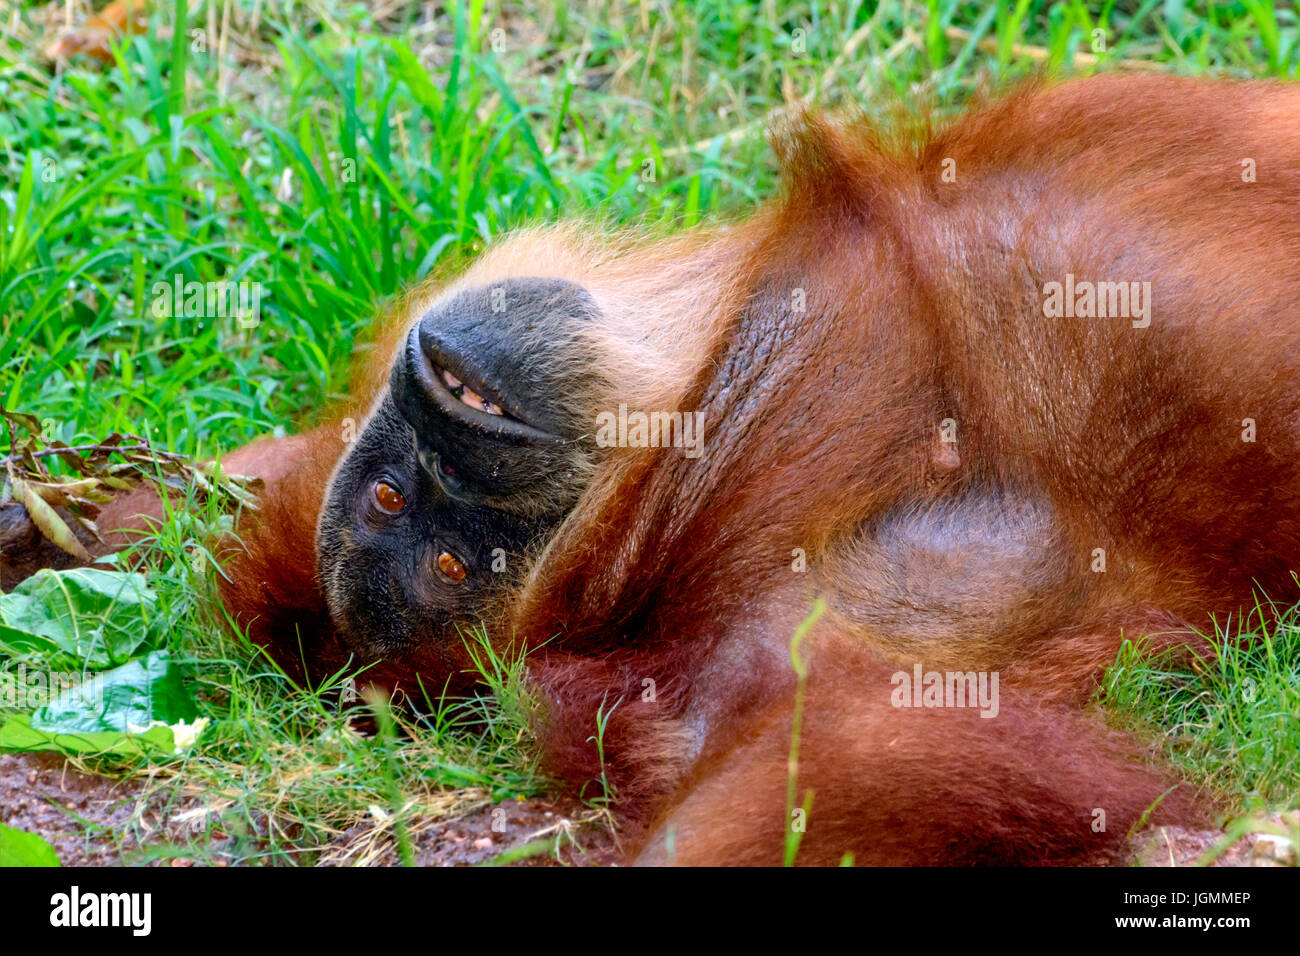 Orangutan, orang-utan, orangutang, or orang-utang, Asian great apes native to Indonesia and Malaysia, in the rainforests of Borneo and Sumatra. Laying Stock Photo